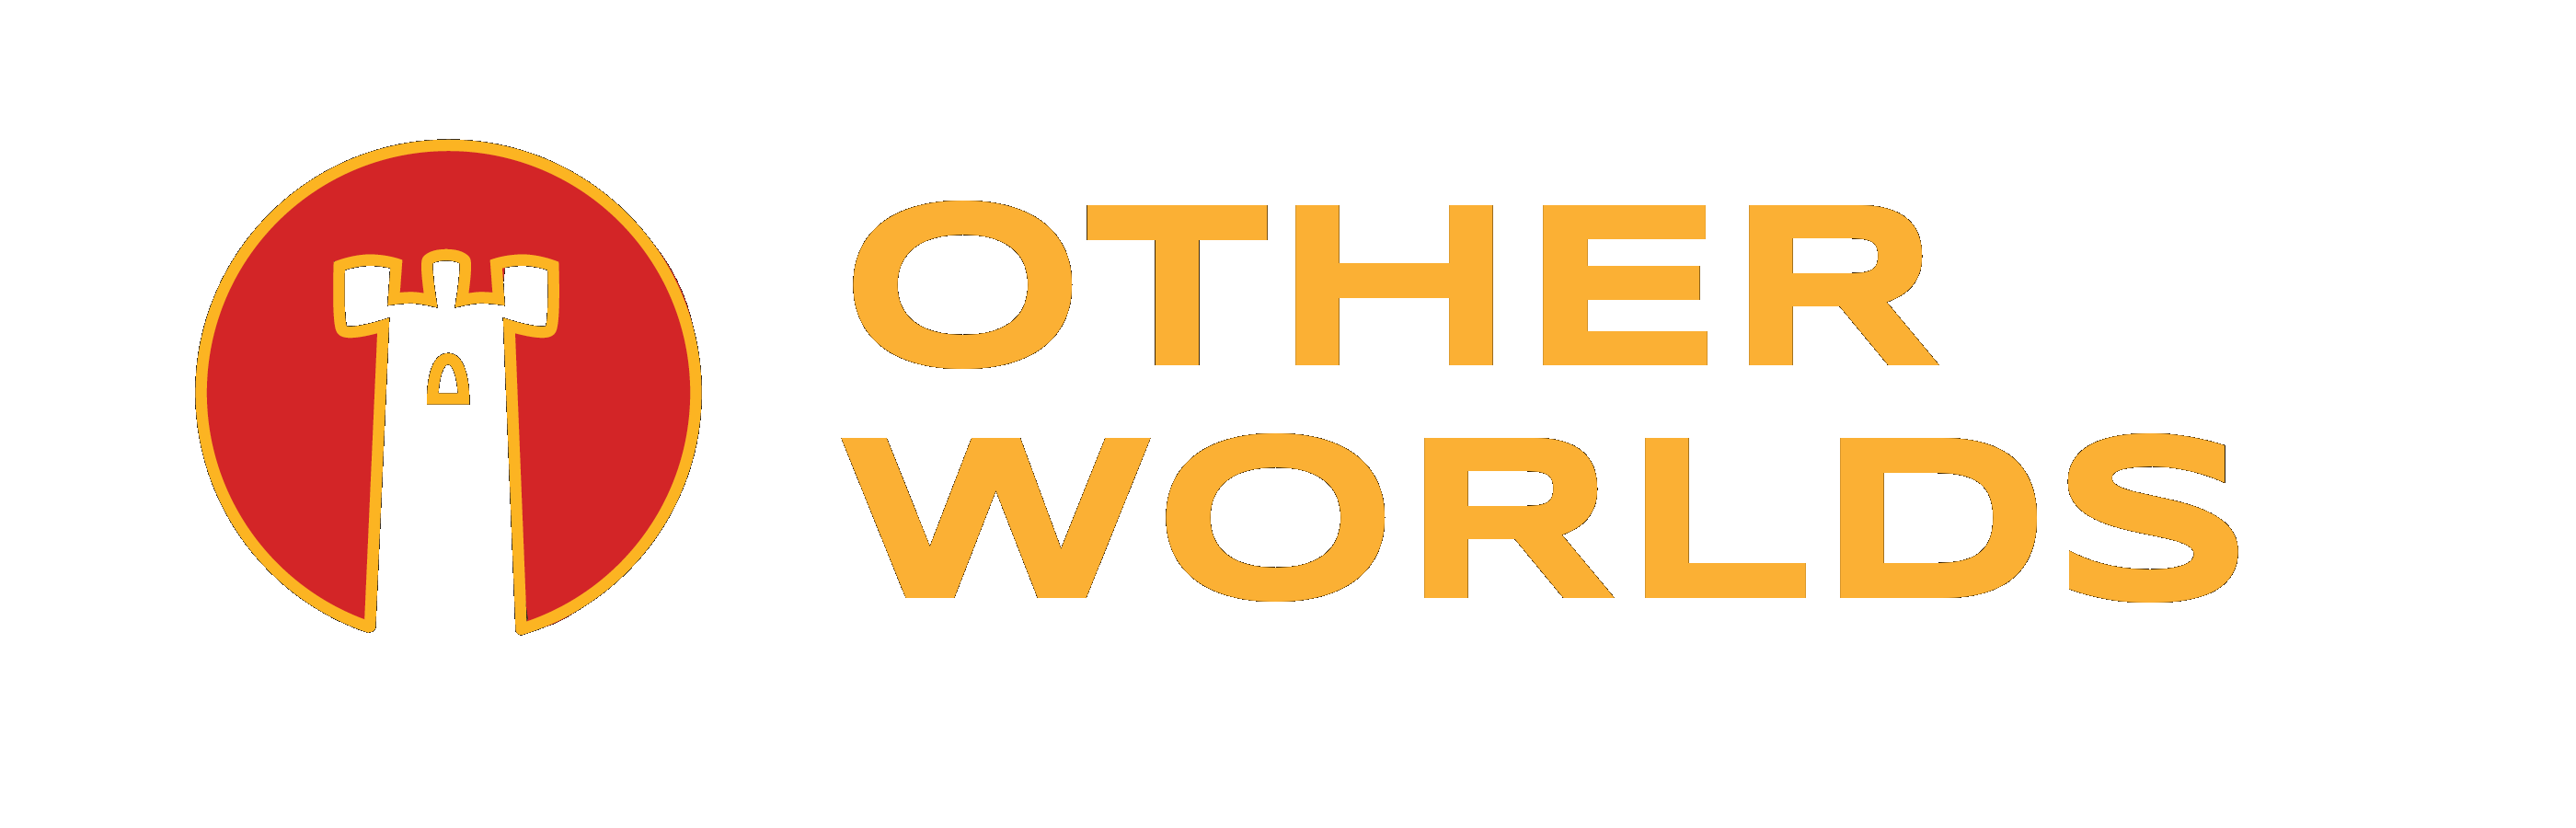 Other Worlds Games